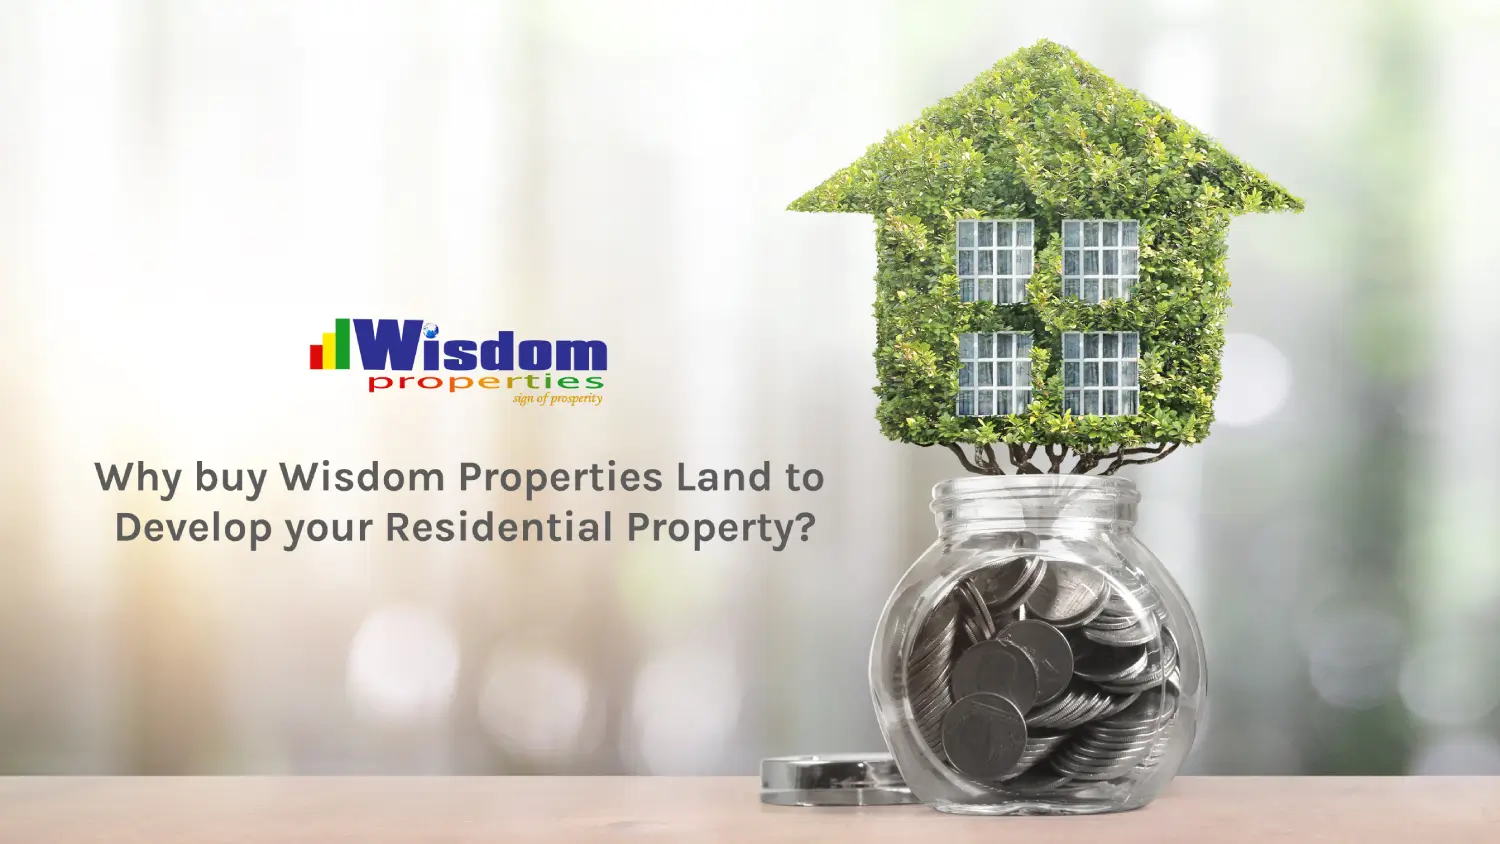 Why buy Wisdom Properties Land to Develop your Residential Property